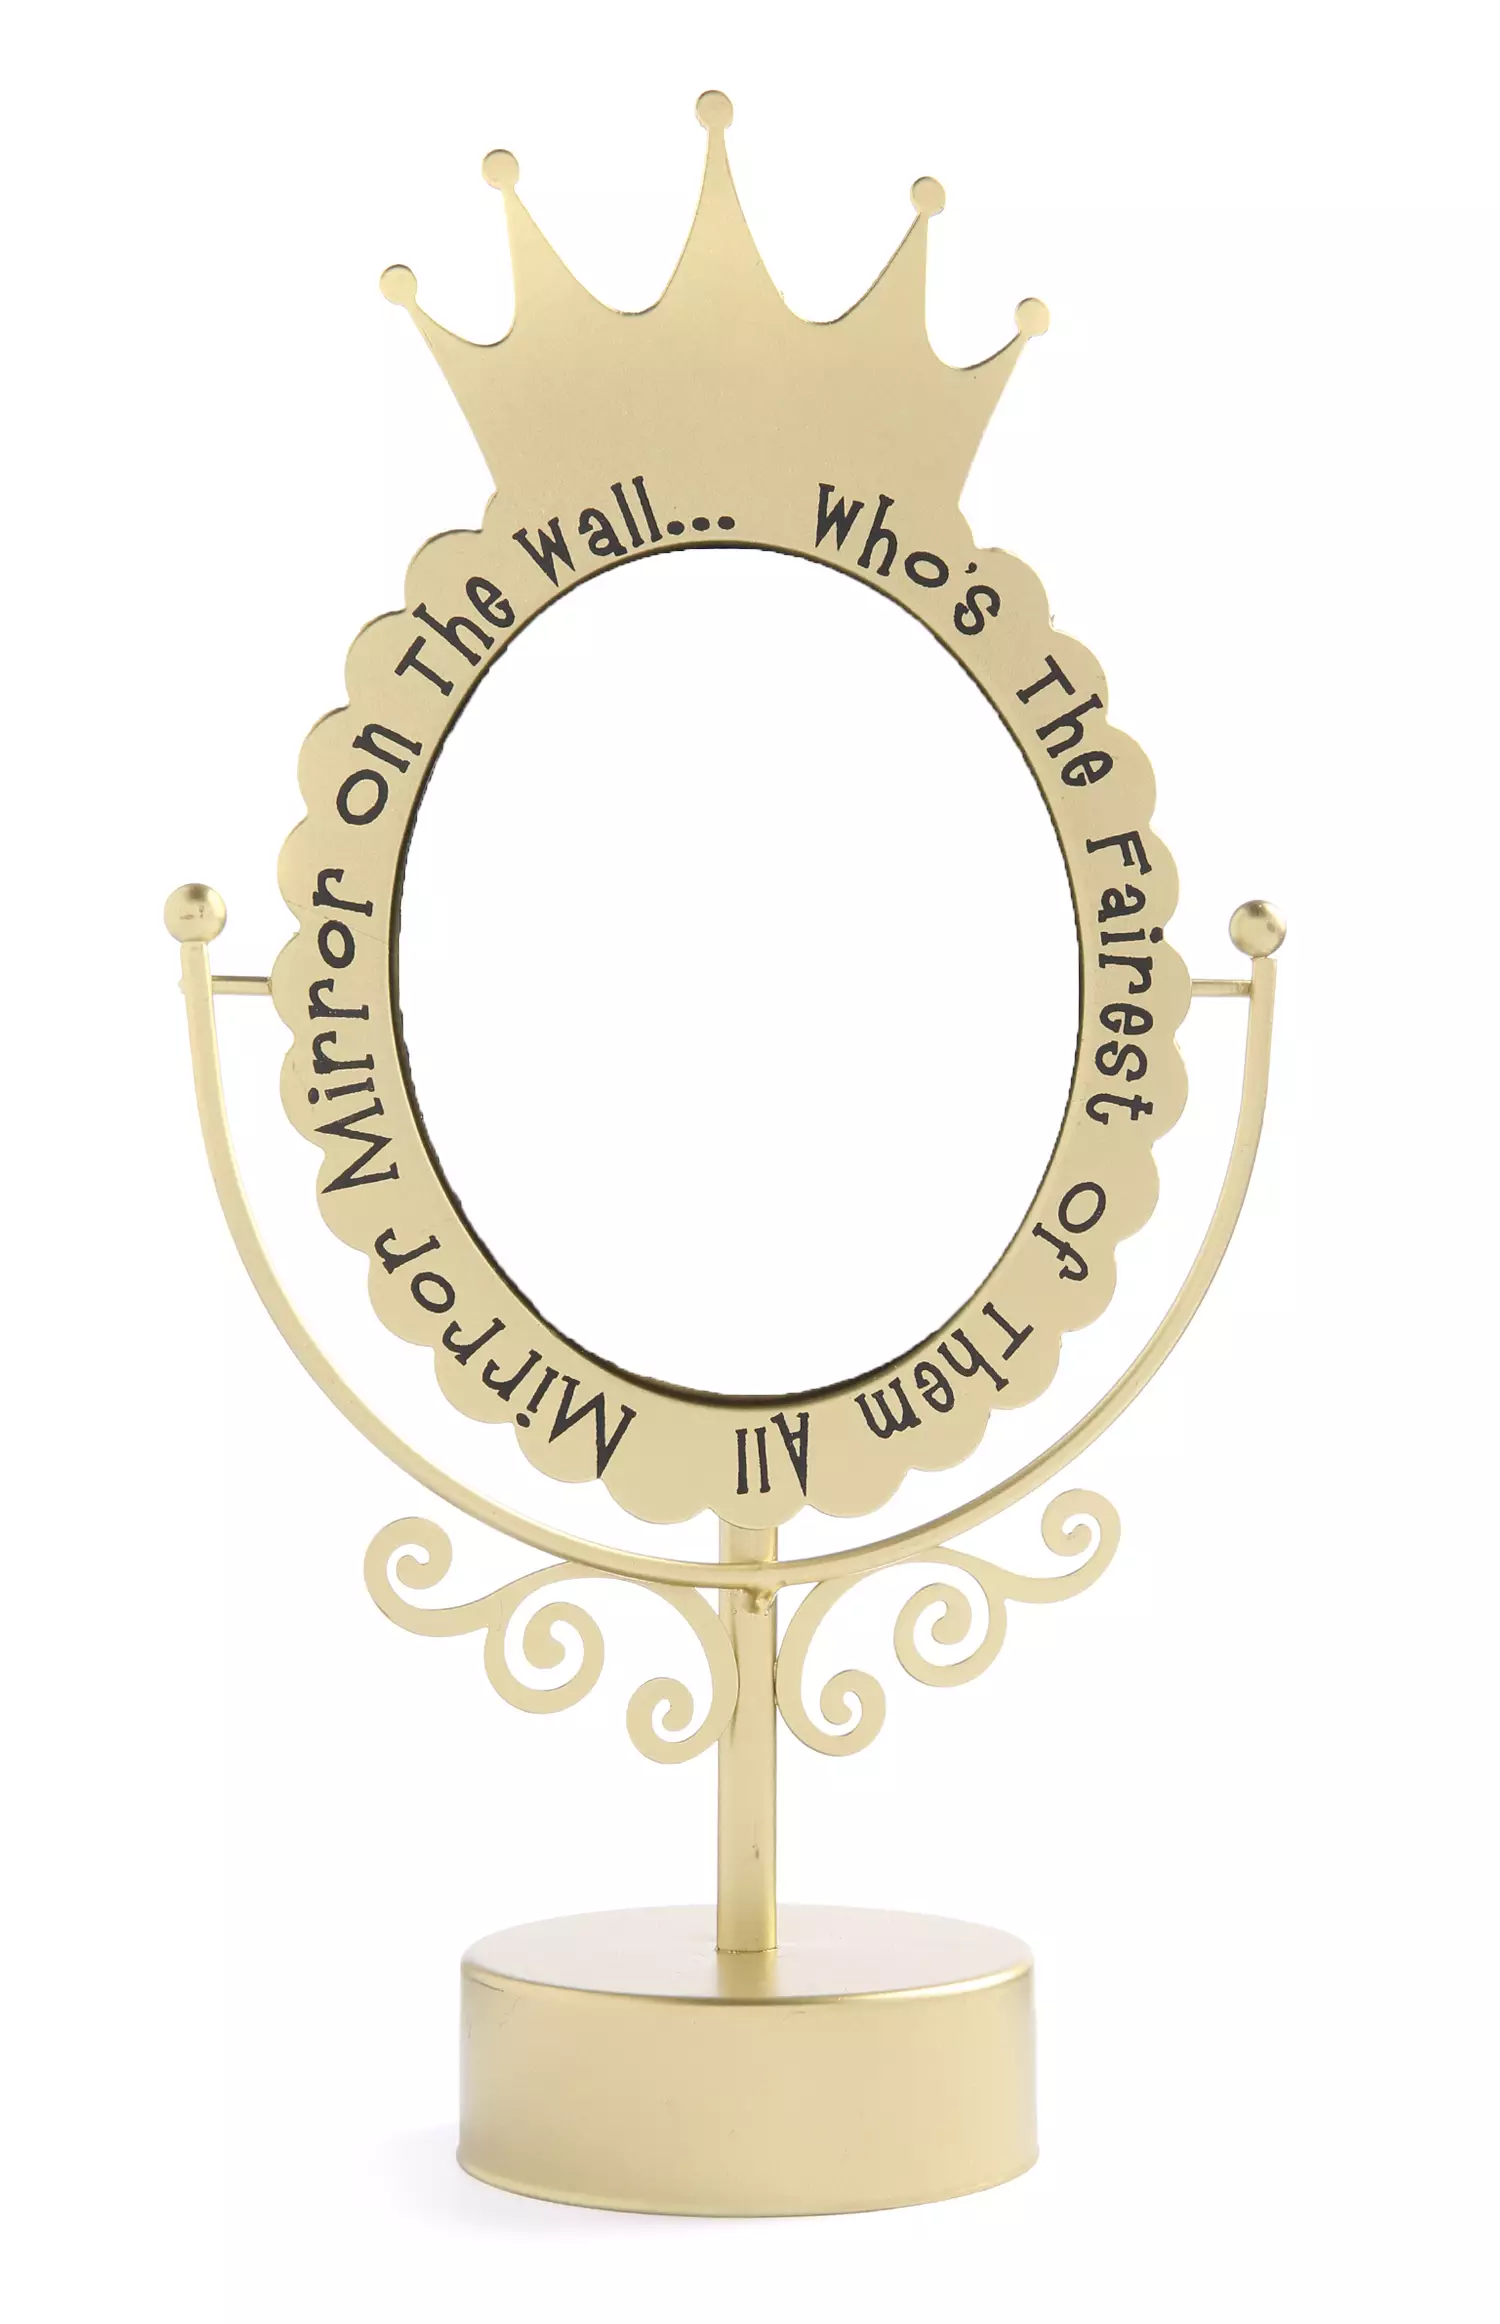 Snow White Standing Mirror comes in at £7.